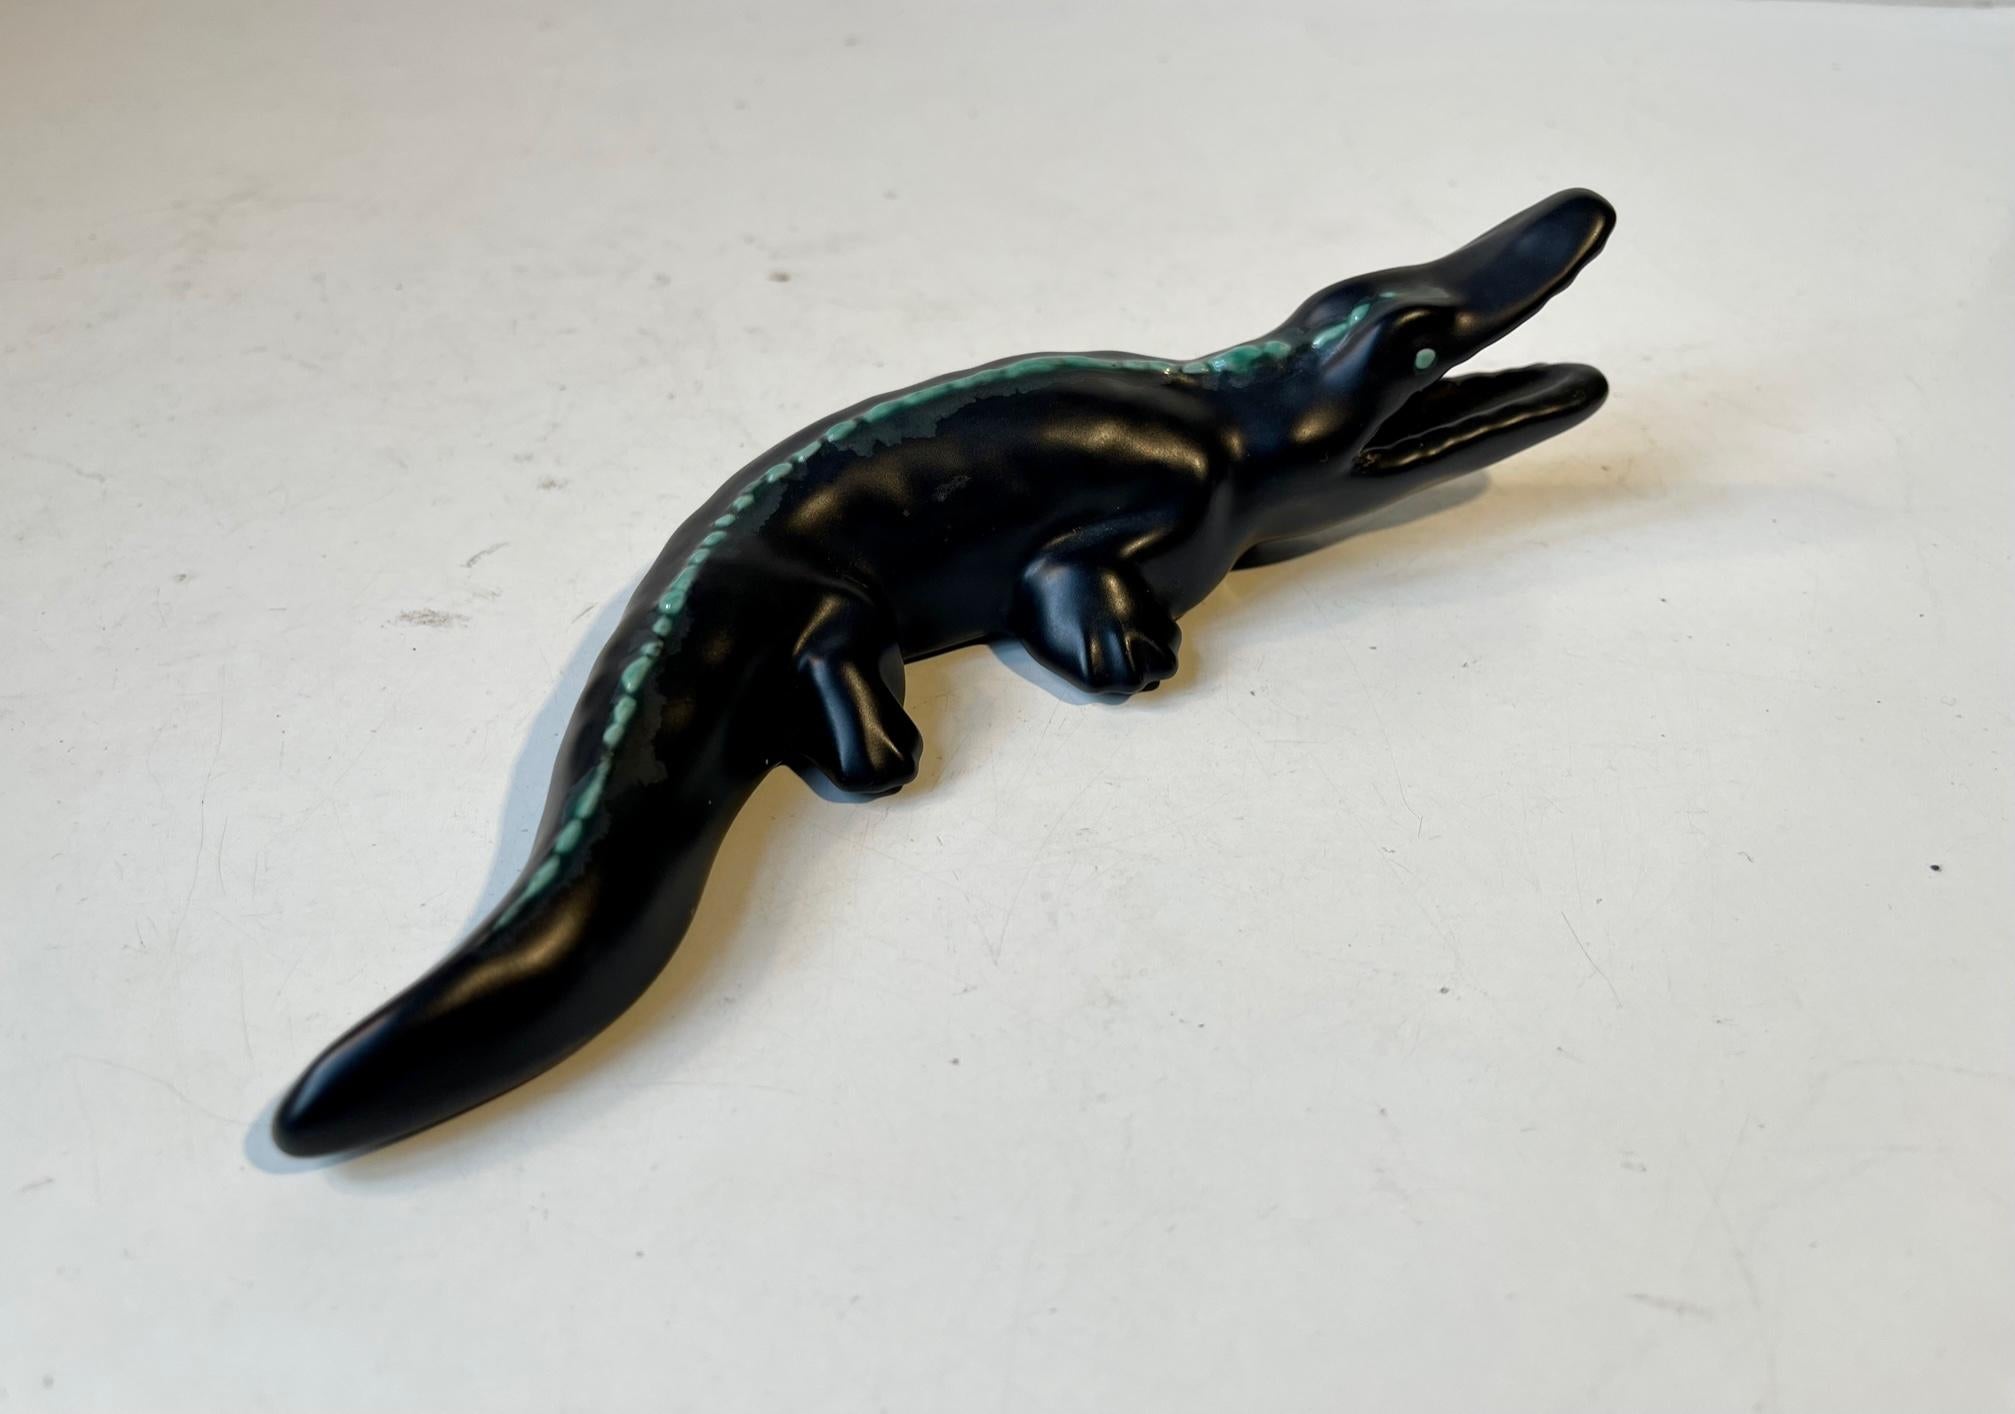 A glazed black crocodile or Alligator decorated with green dots across its spine. It can be displayed lying of wall mounted. Designed and made at Søholm in Denmark circa 1950-60. Measurements: L: 20 cm, H: 5 cm, W: 7.5 cm.